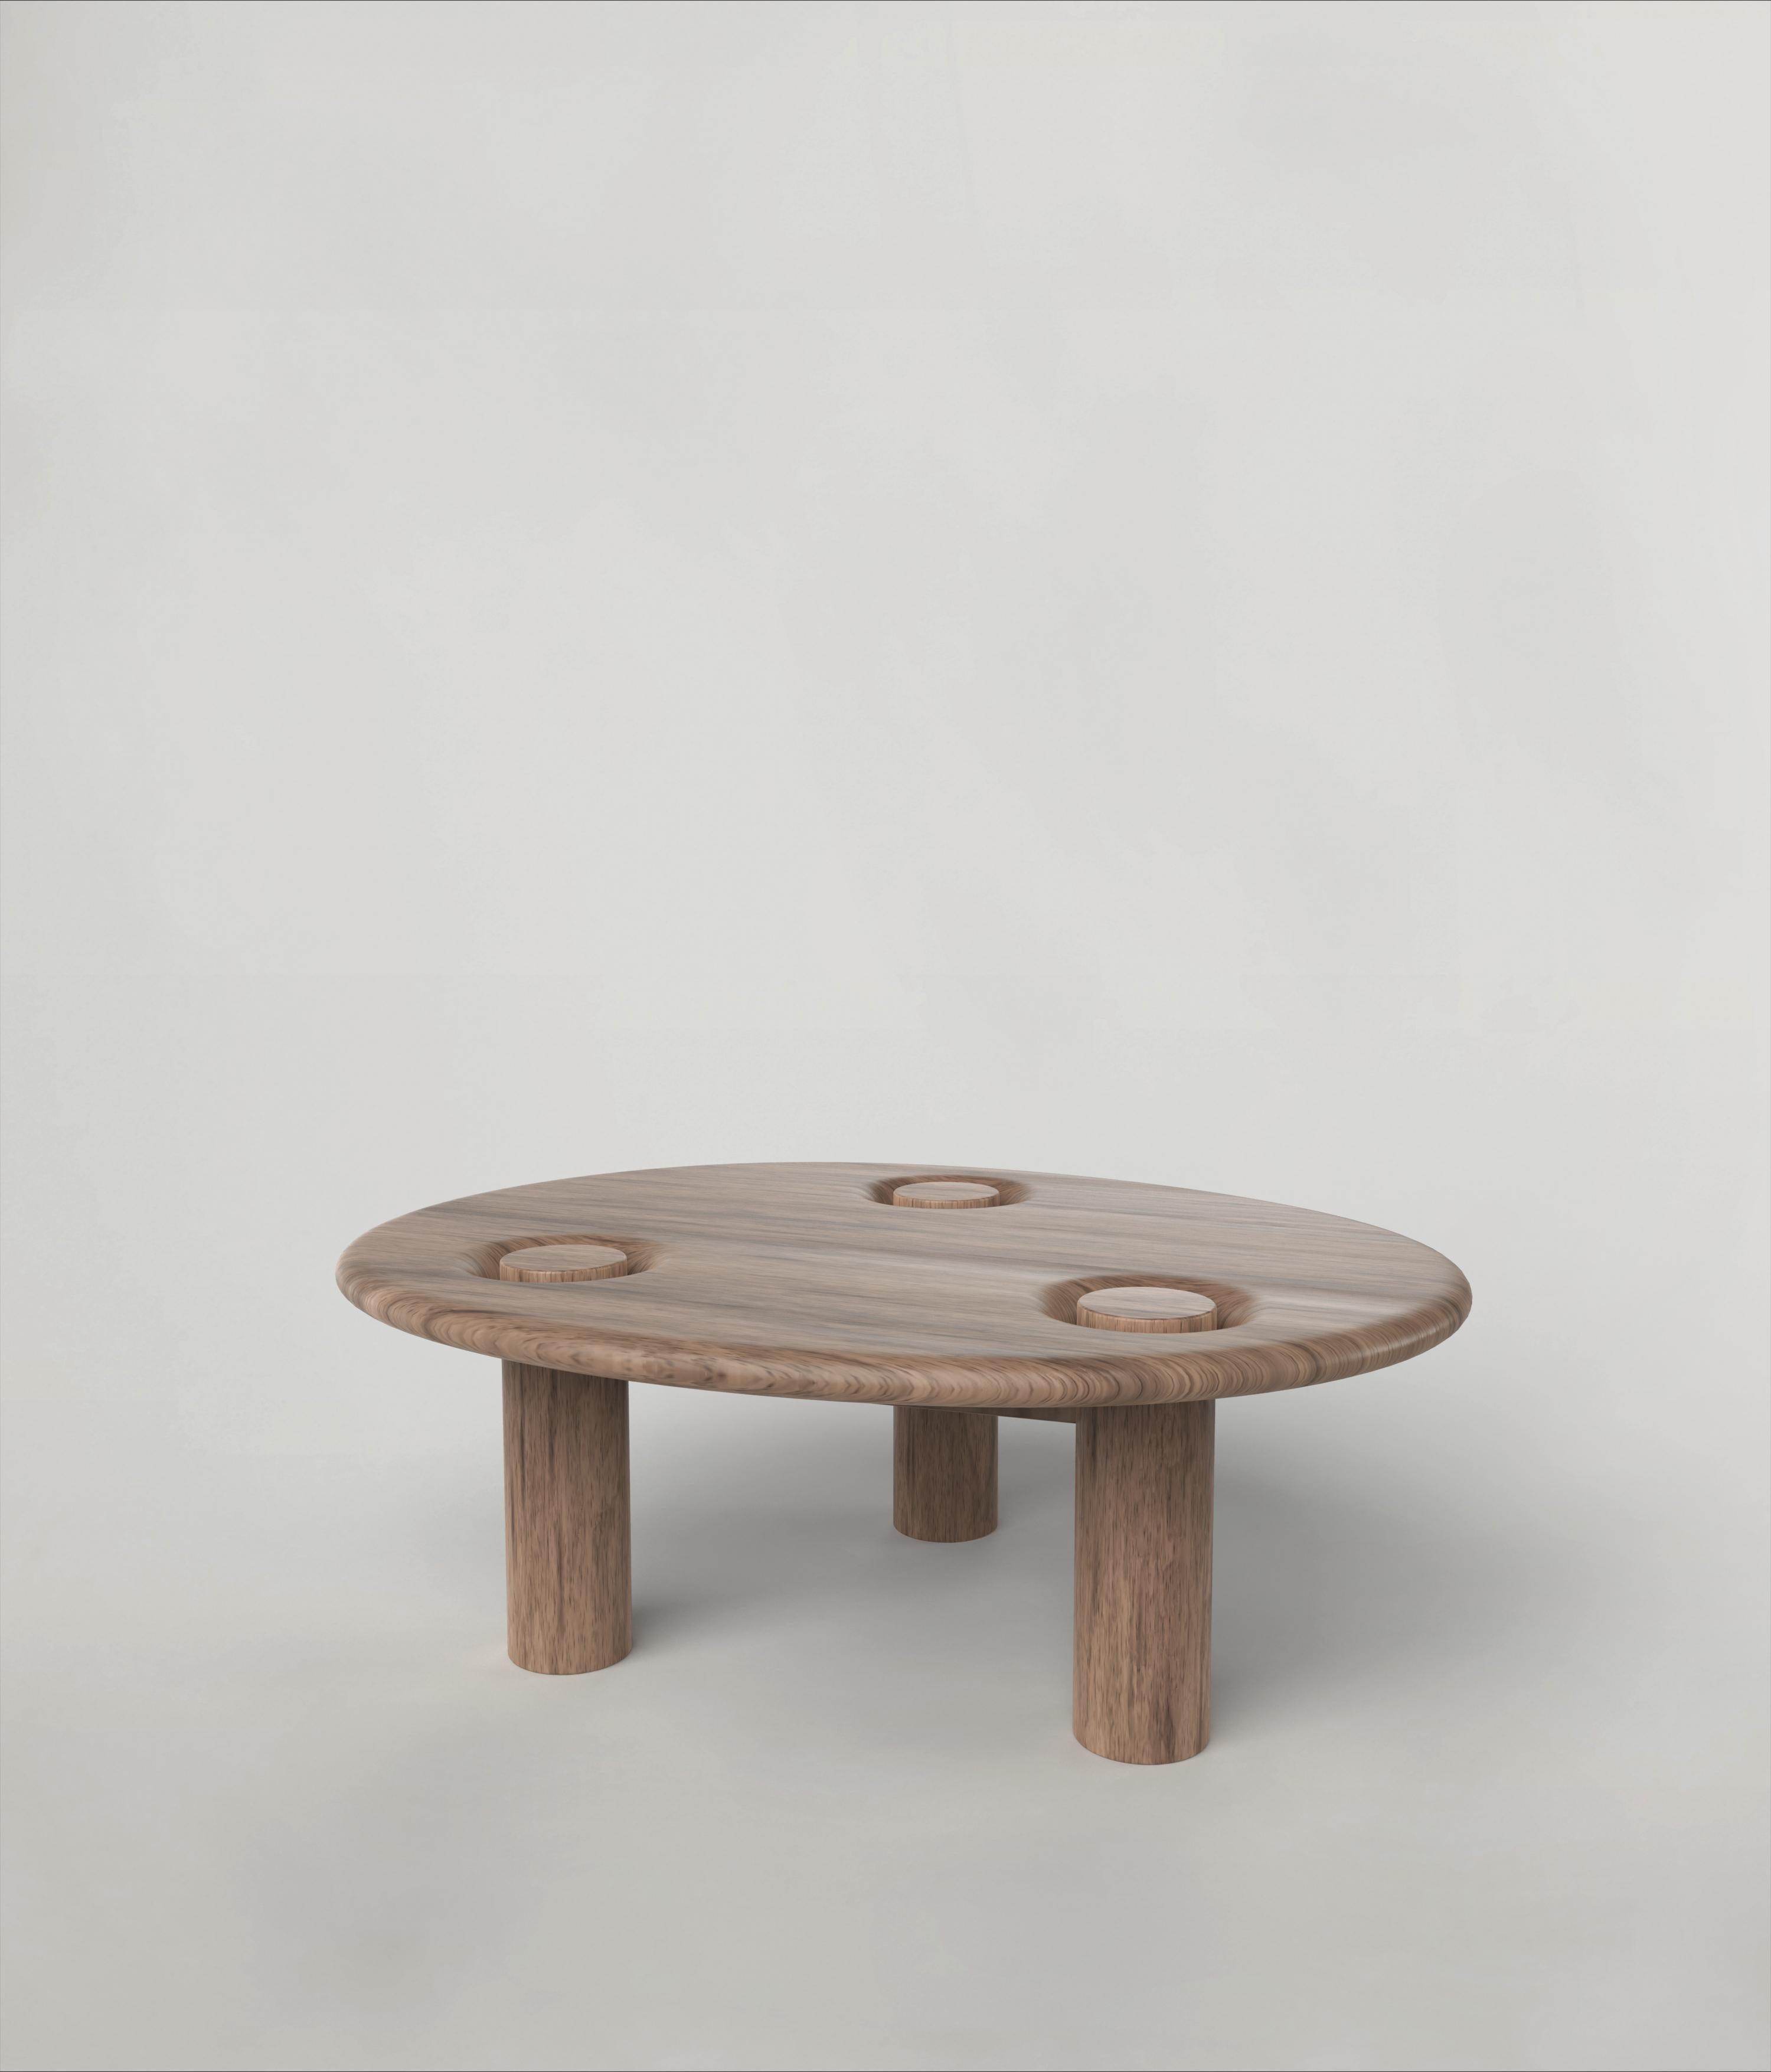 Asido V1 low table by Edizione Limitata
Limited edition of 150 pieces. Signed and numbered.
Dimensions: D60 x W120 x H30 cm
Materials: solid ash wood

The collectible design language Asido has been developed by the Edizione Limitata’s art